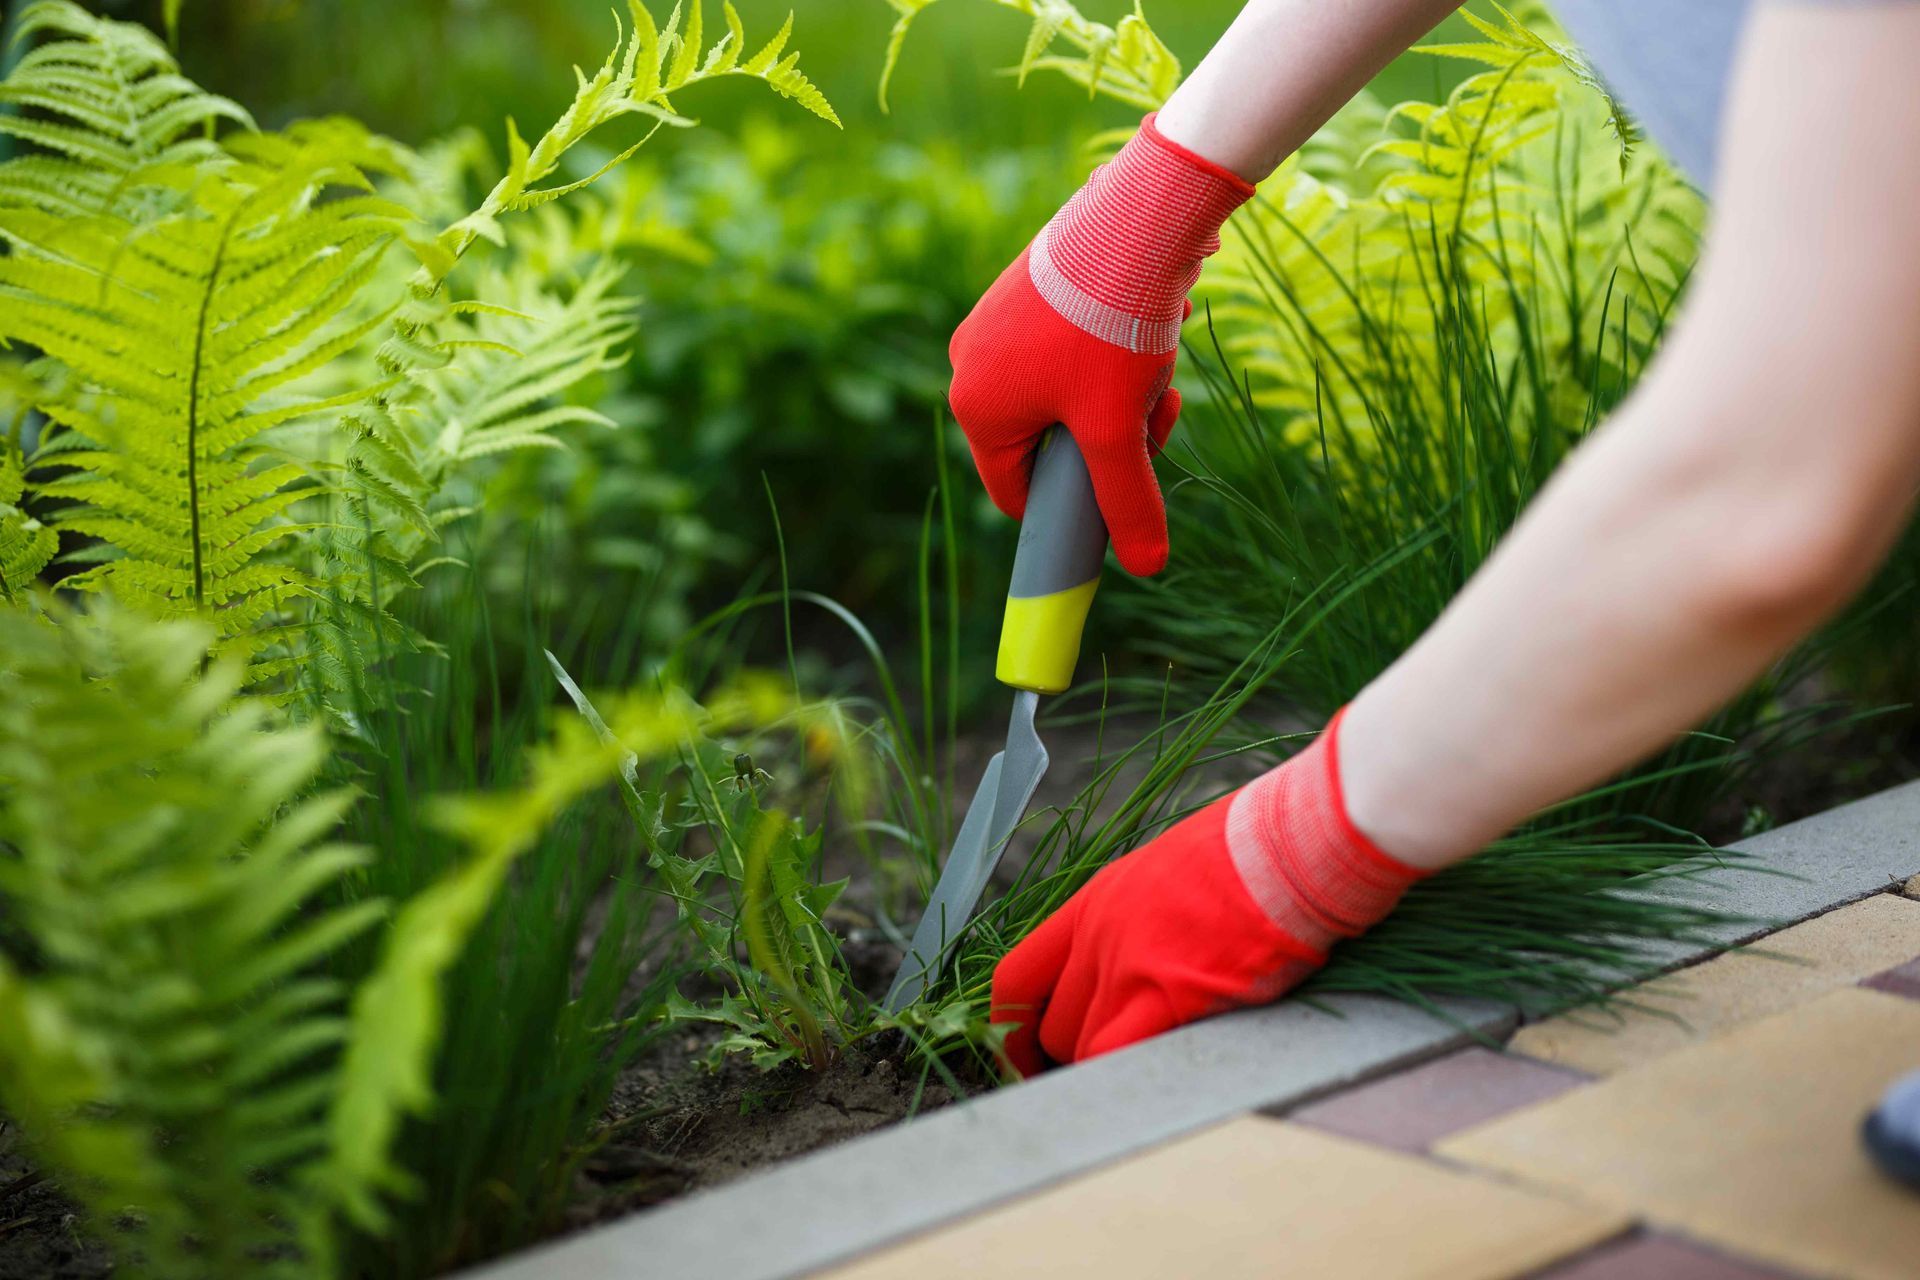 a person wearing red gloves is using a trowel to remove weeds from a garden